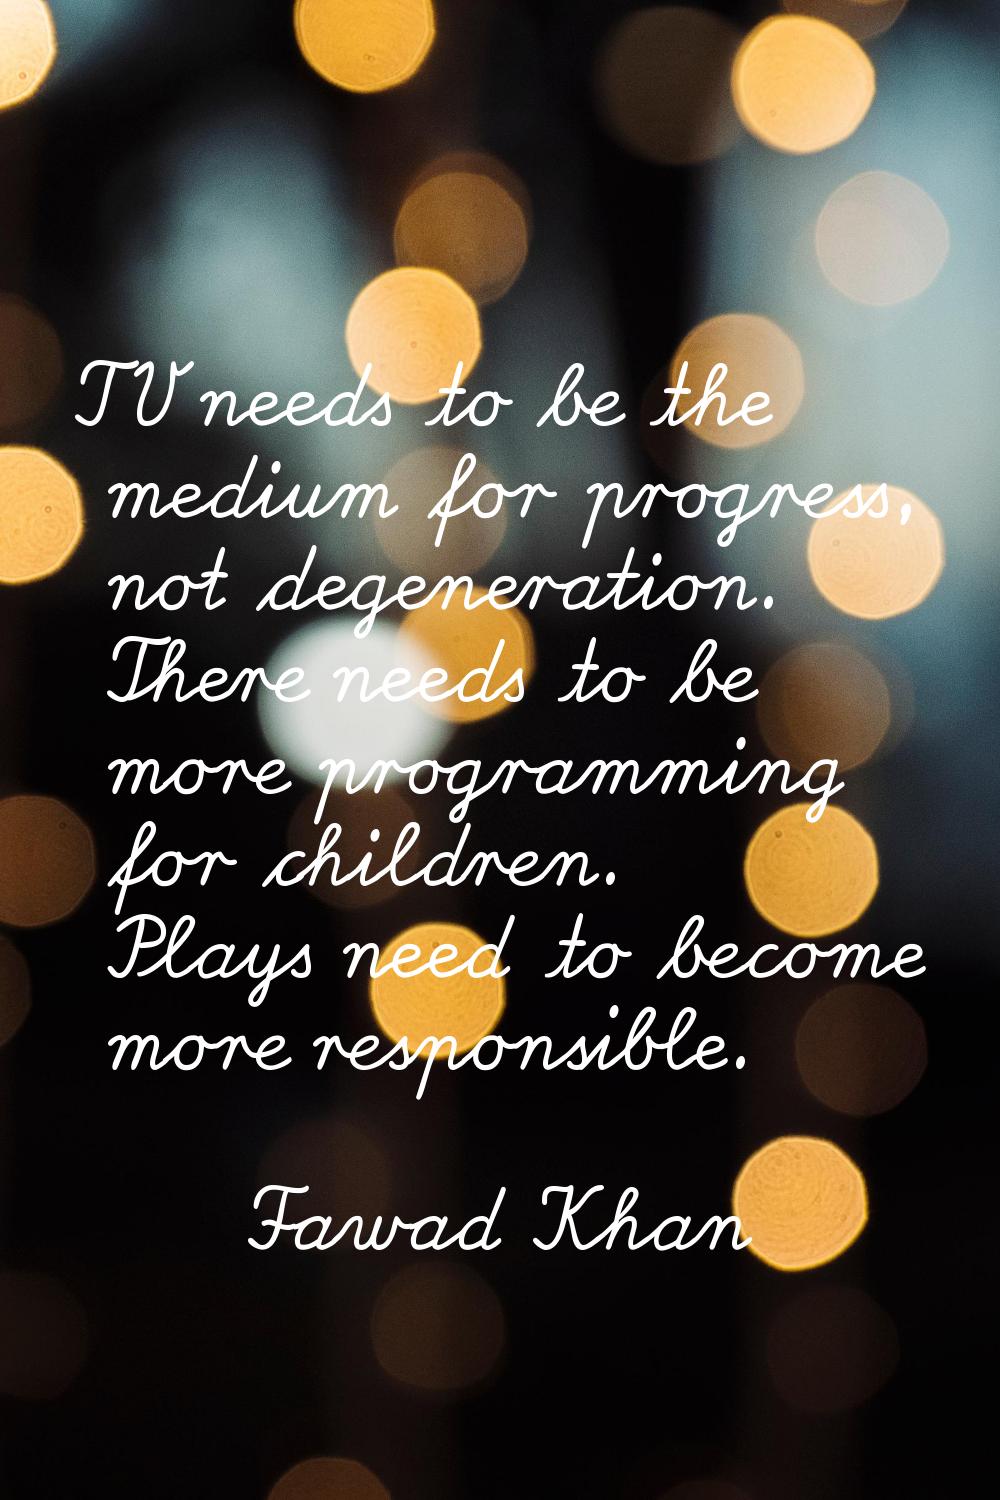 TV needs to be the medium for progress, not degeneration. There needs to be more programming for ch